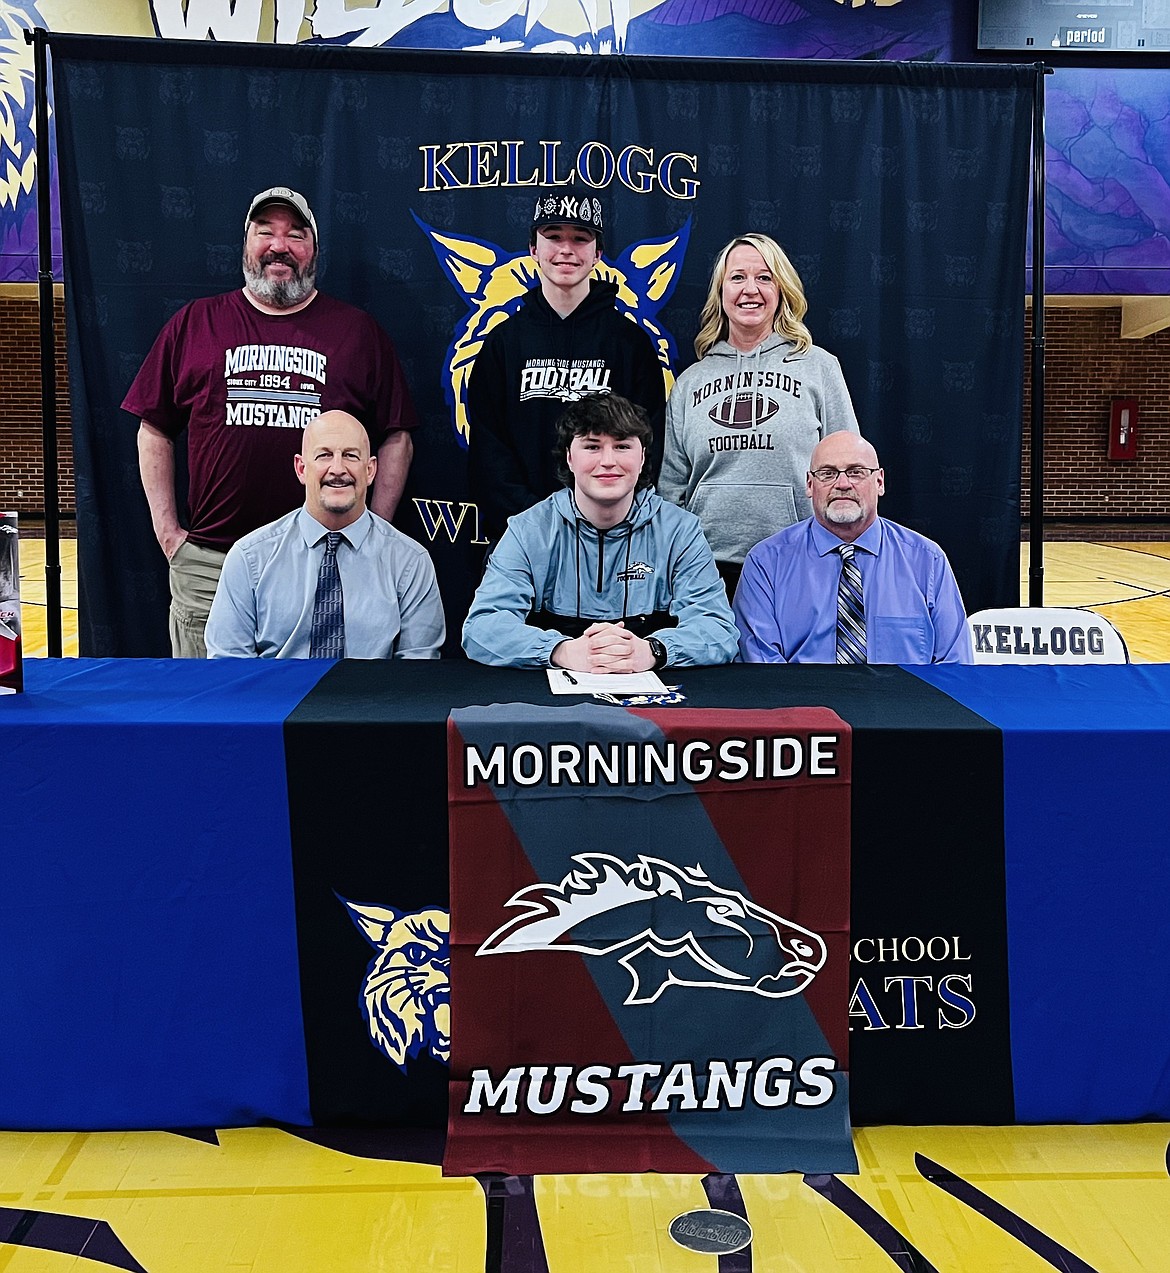 Kellogg High School football standout Varick Meredith recently signed his letter of intent to play football at Morningside University in Sioux City, Iowa. Pictured are Meredith's family members (dad) Monte, (brother) Braden and (mom) Julie. Pictured at the table is Kellogg head coach and principal Dan Davidian, Meredith and coach Tim Kimberling.